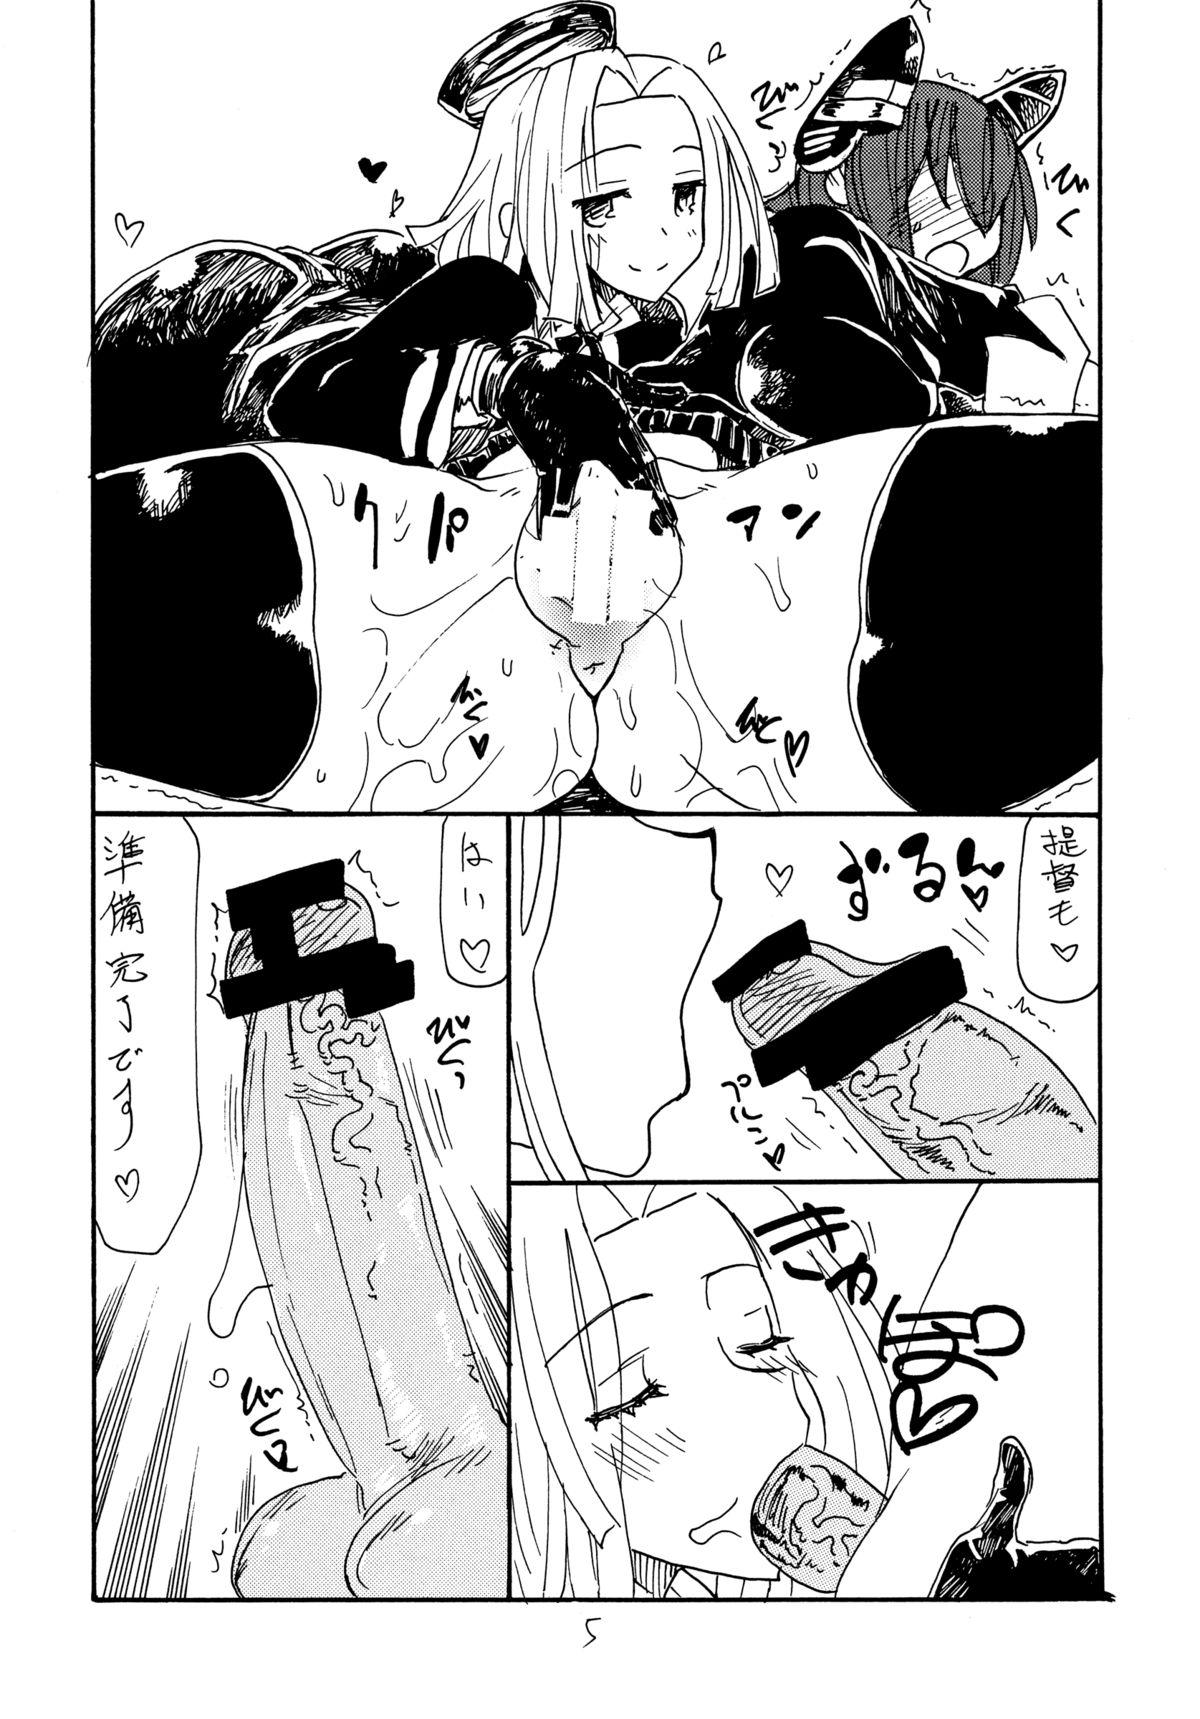 Best Blowjobs Tenpo - Kantai collection Jerk - Page 4